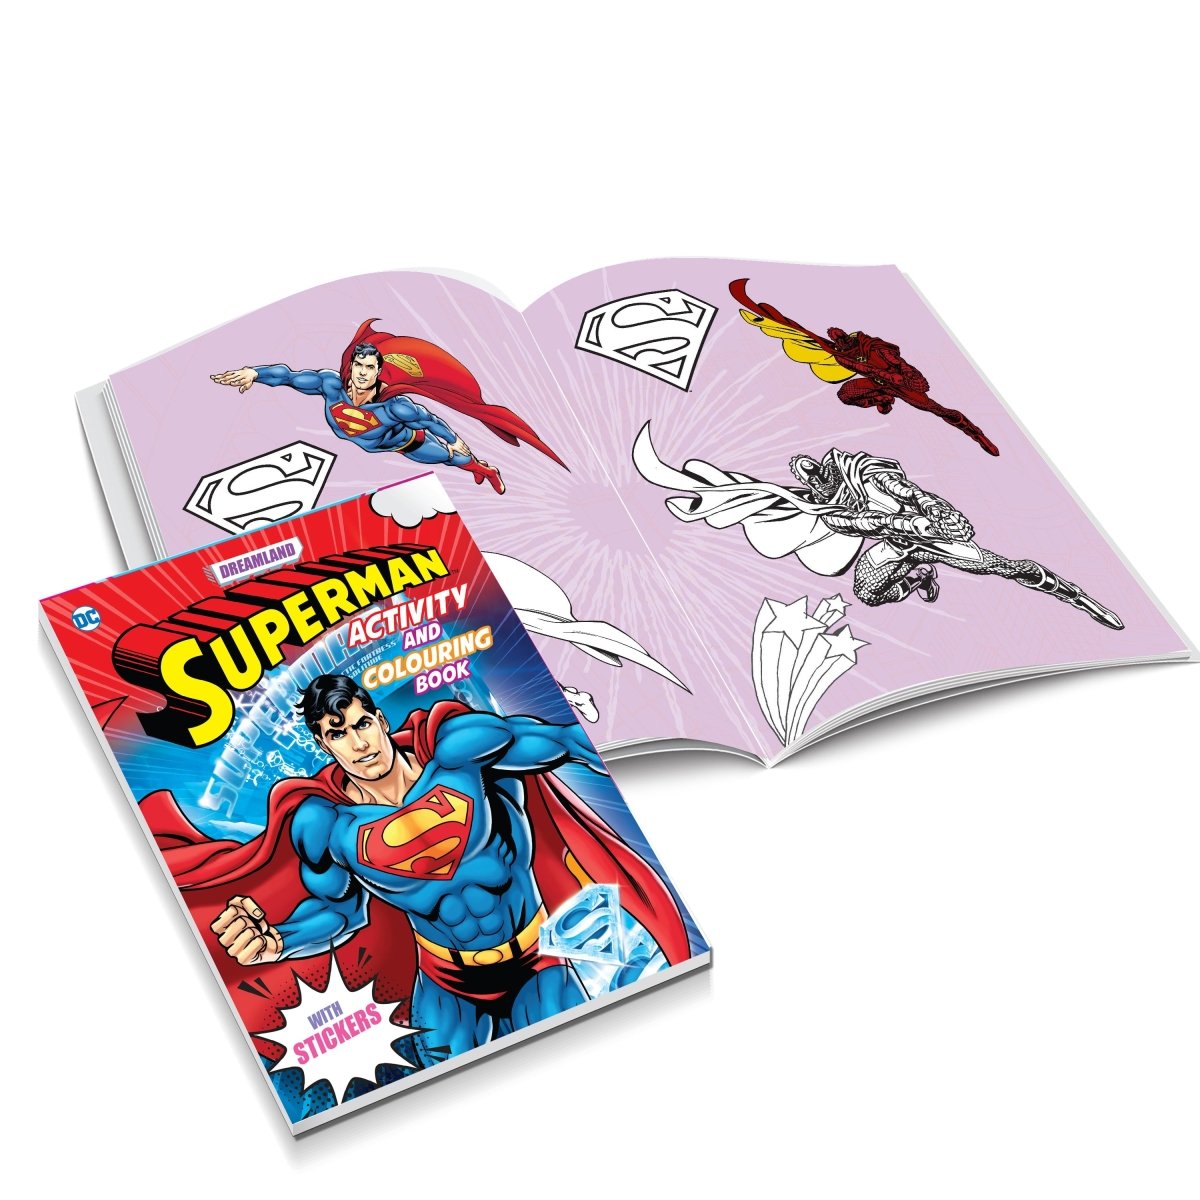 Dreamland Publications Superman Copy Colouring And Activity Books Pack (A Pack of 5 Books) - 9789394767843